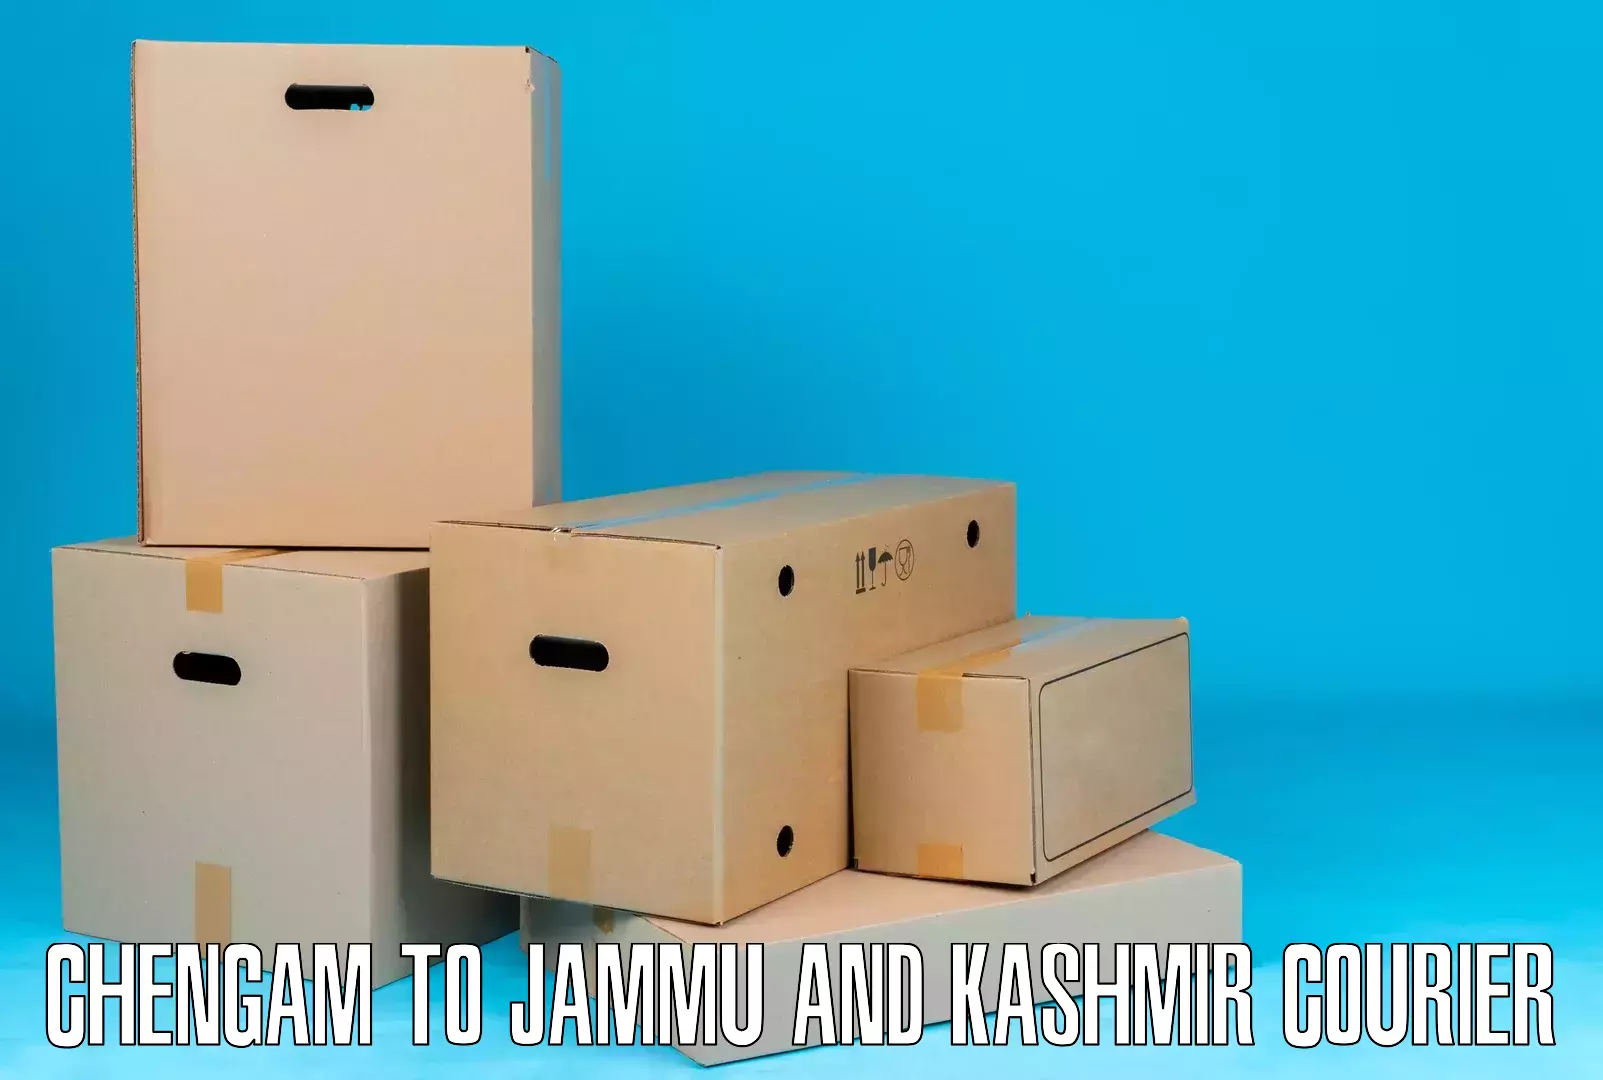 Enhanced shipping experience in Chengam to Baramulla